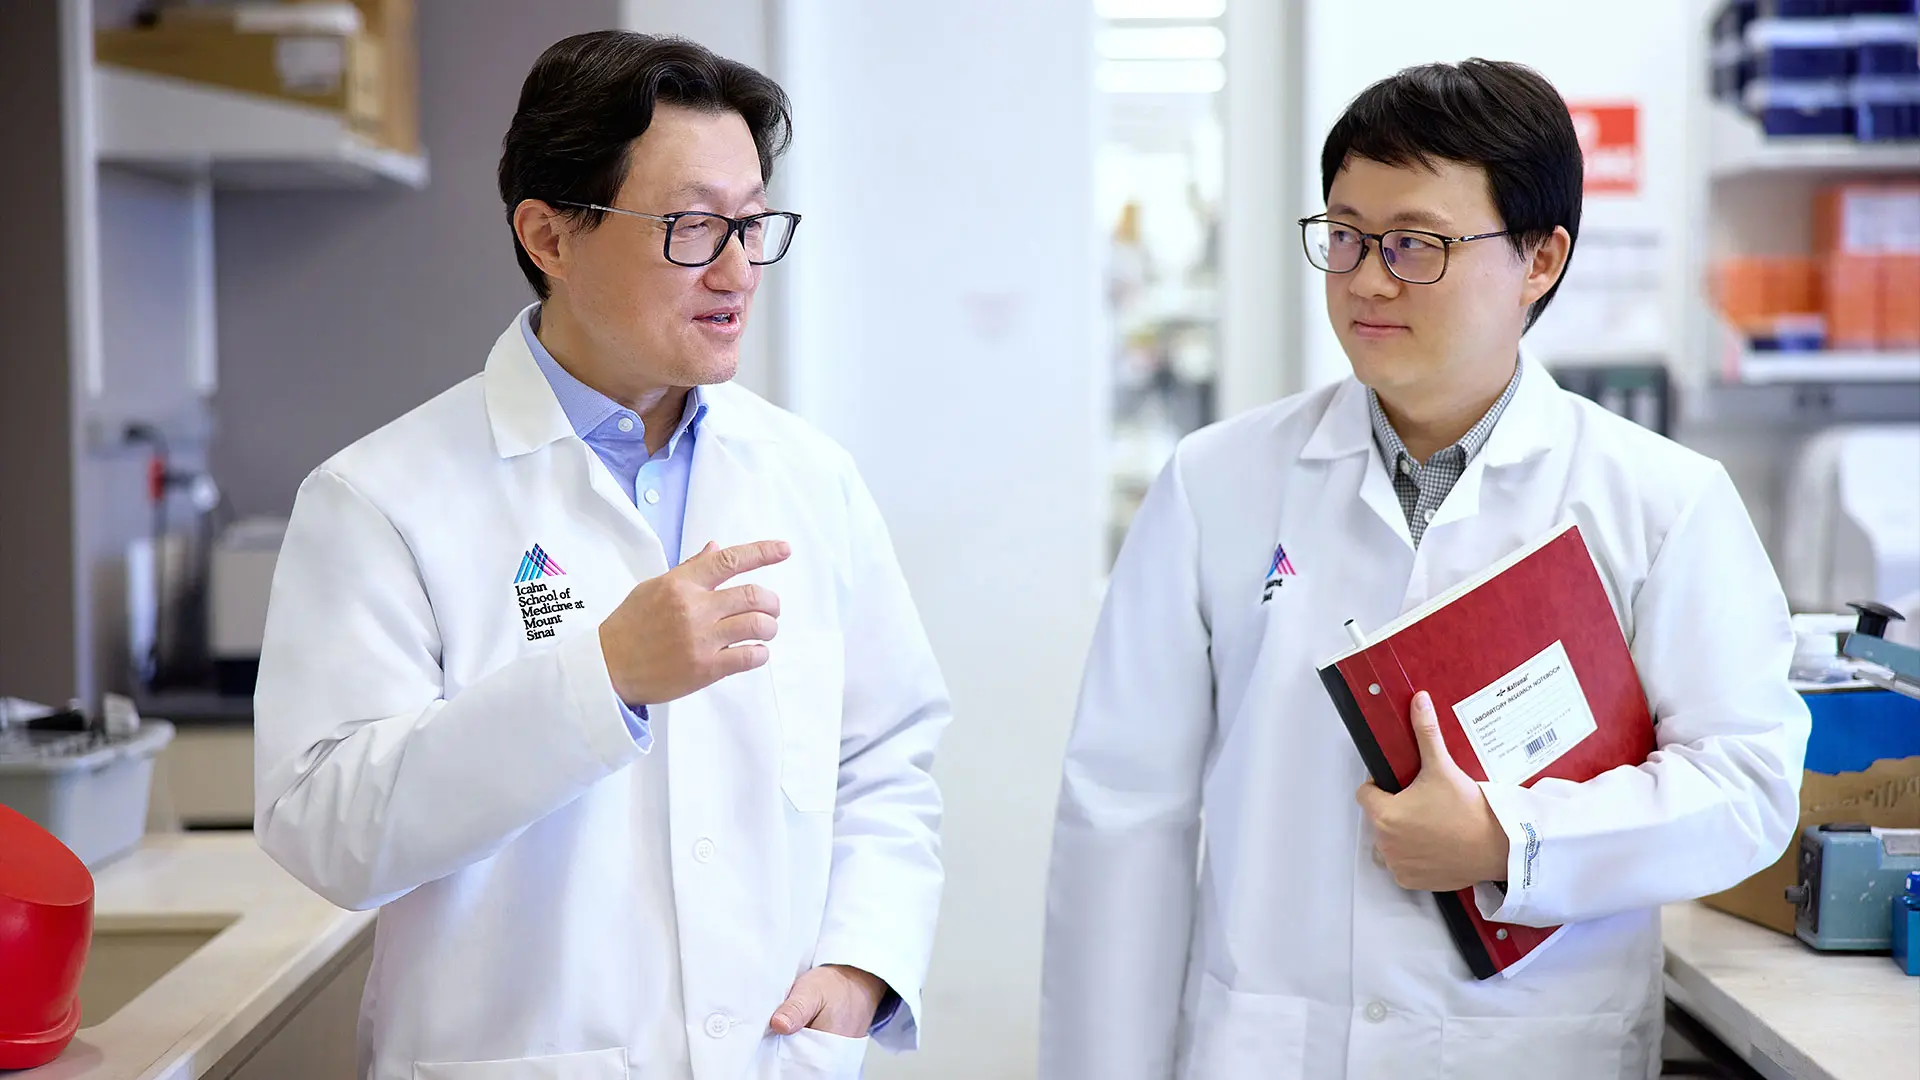 From left: Zhenyu Yue, PhD, and Insup Choi, PhD 